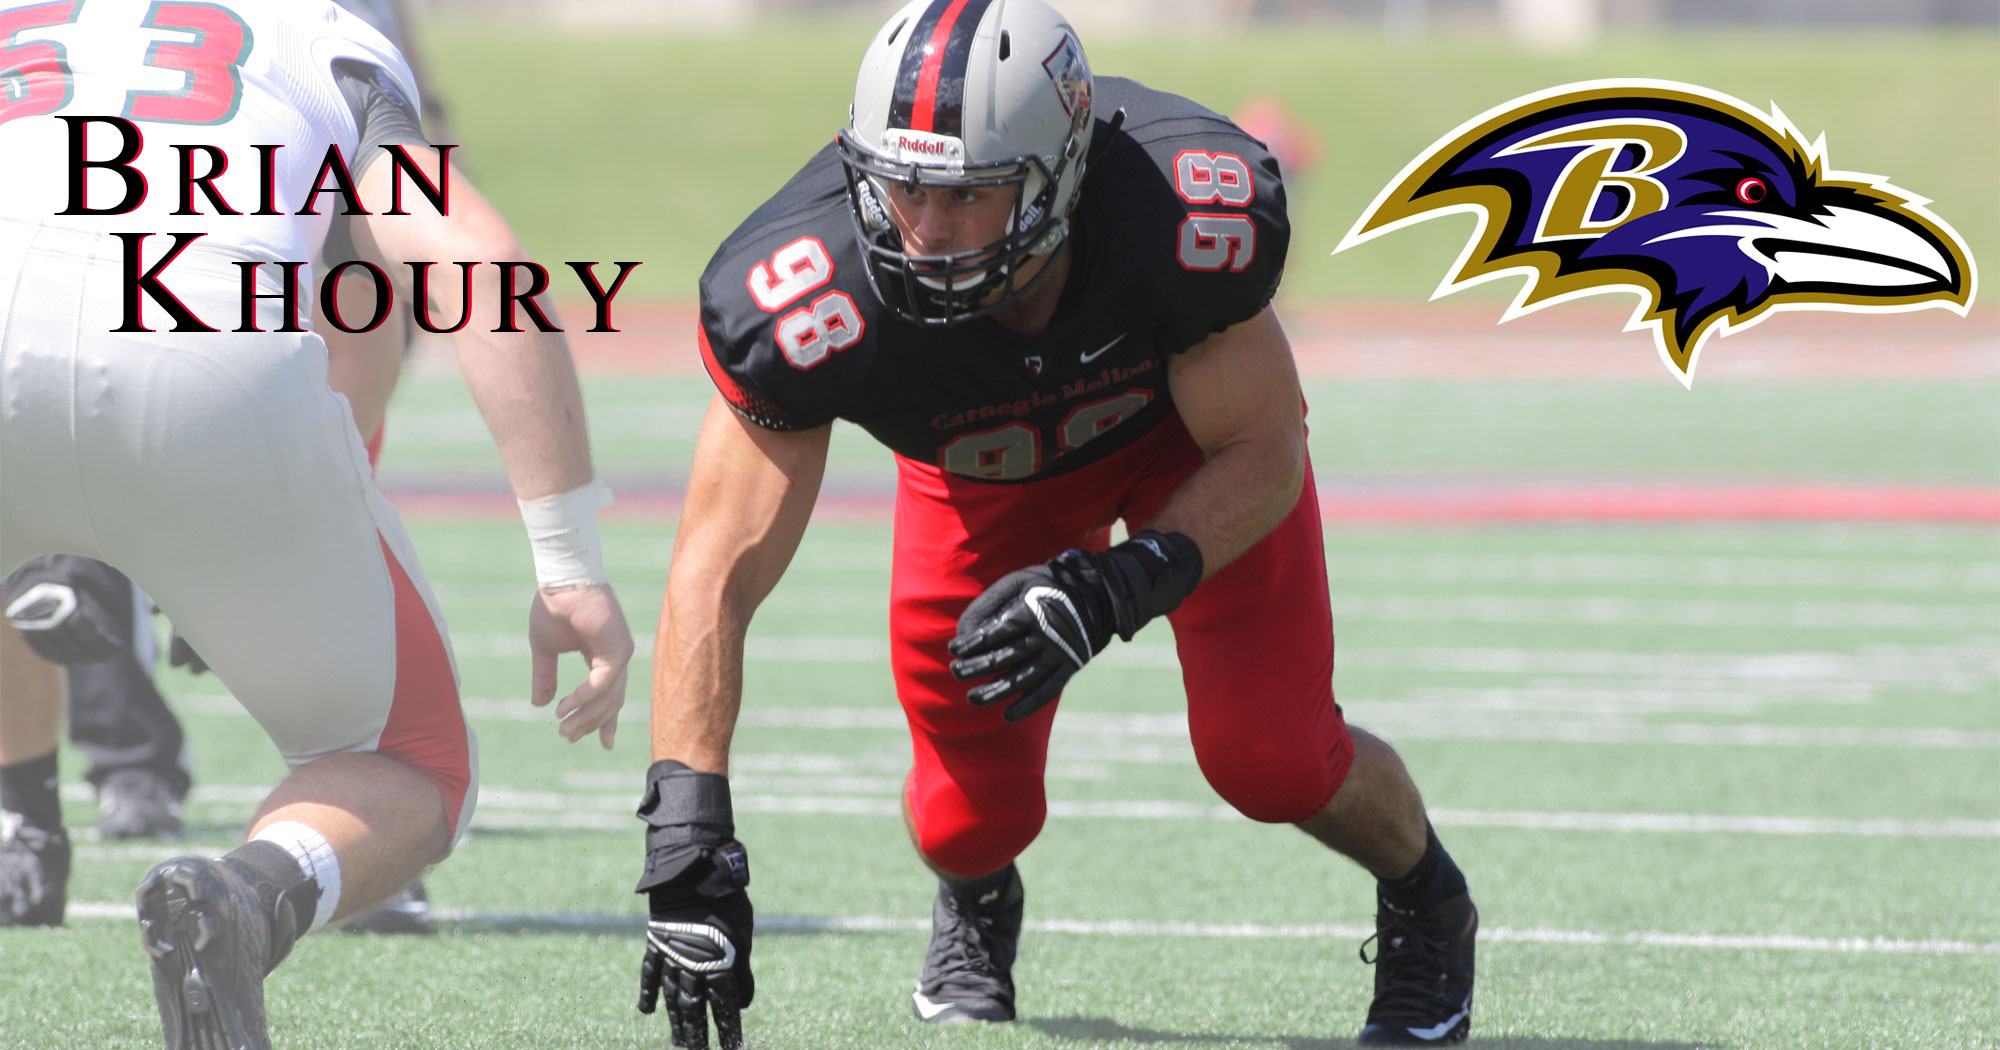 Brian Khoury, 2017 Graduate, Signs With Baltimore Ravens